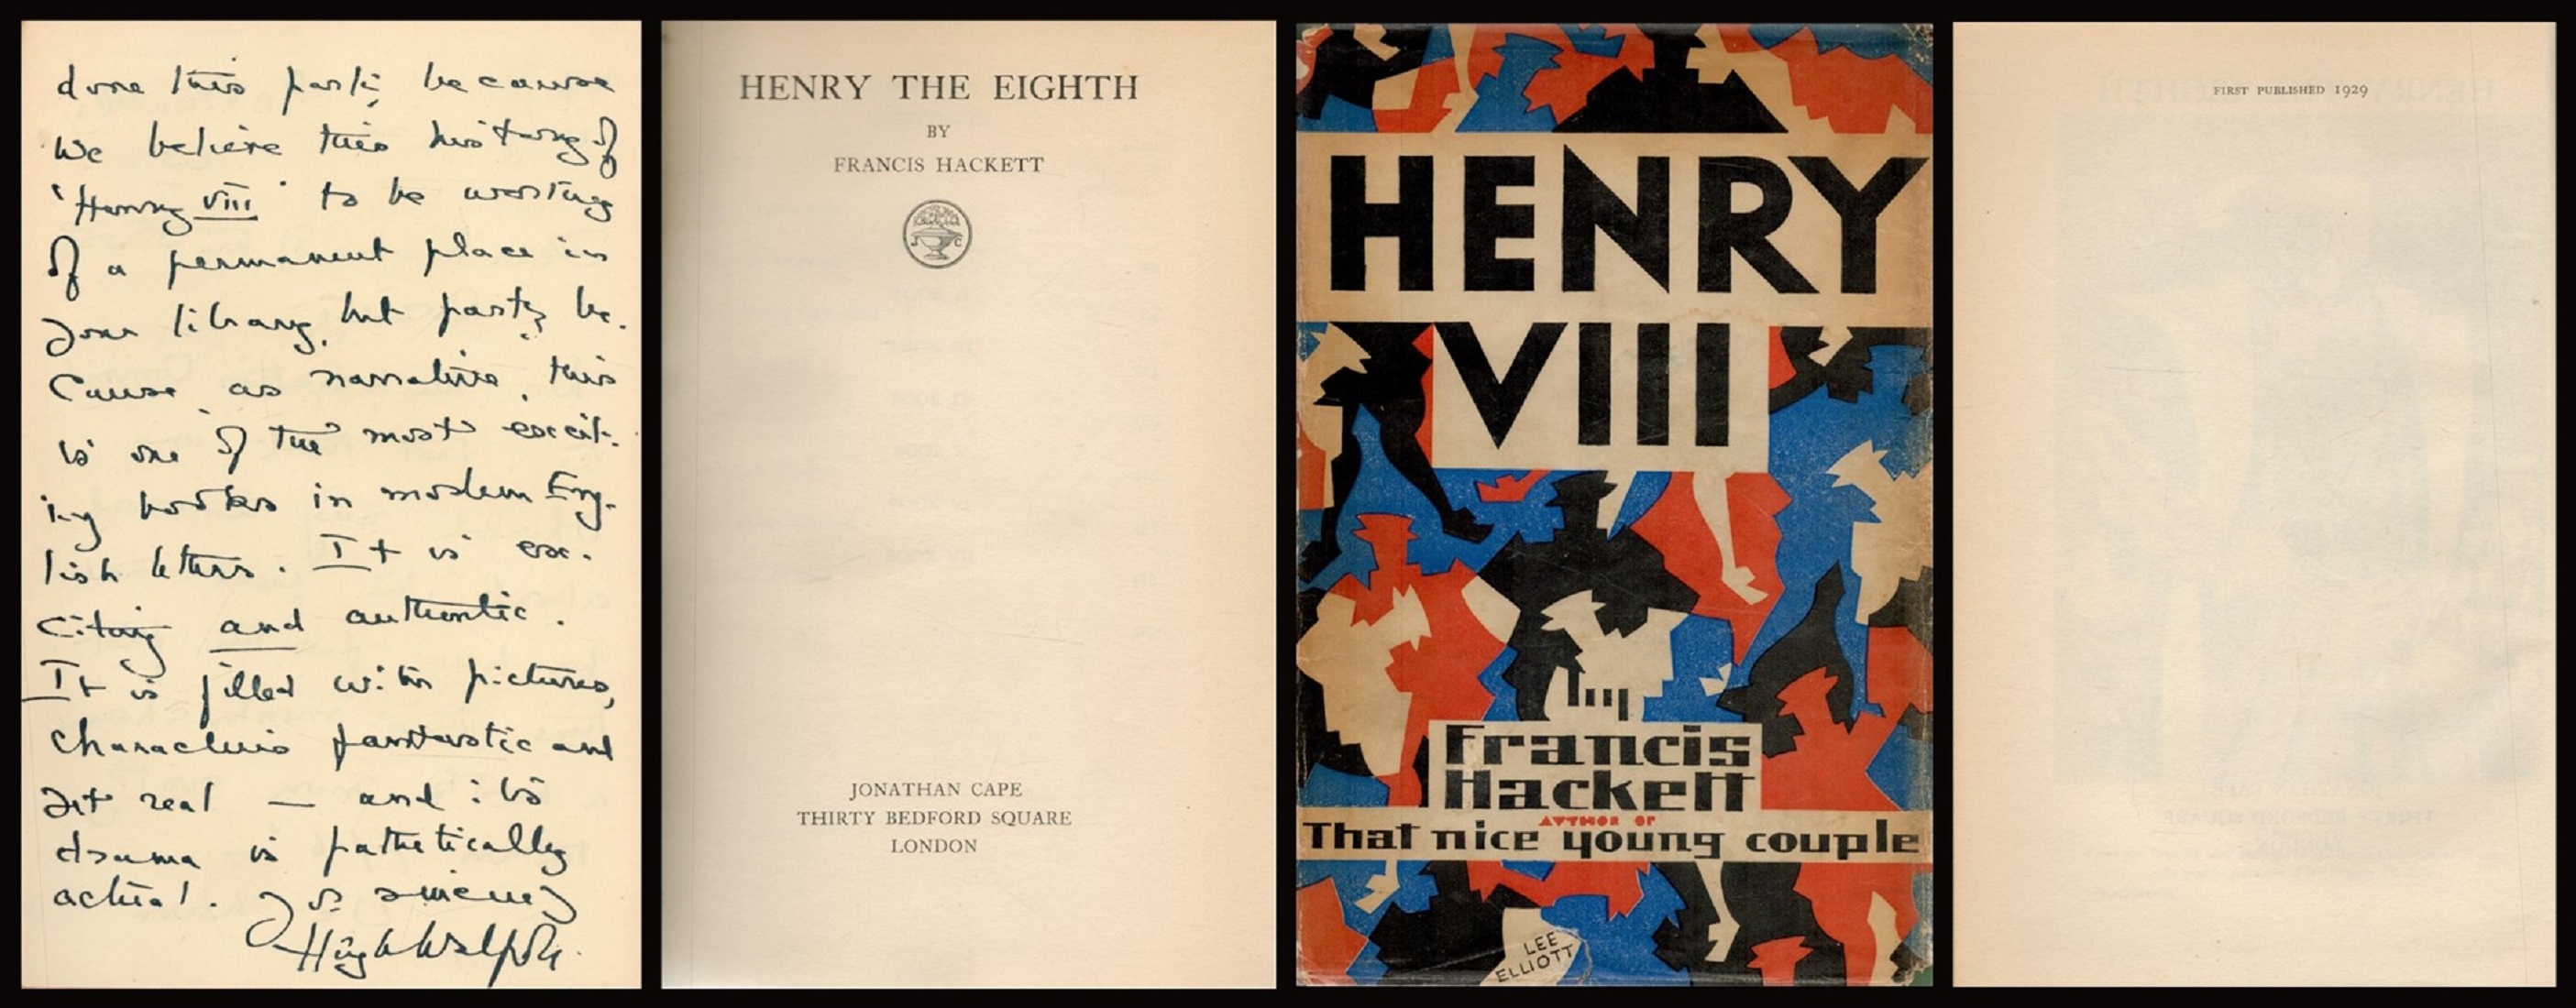 Francis Hackett Henry The Eighth. Published by Jonathan Cape, London. 543 pages including index.